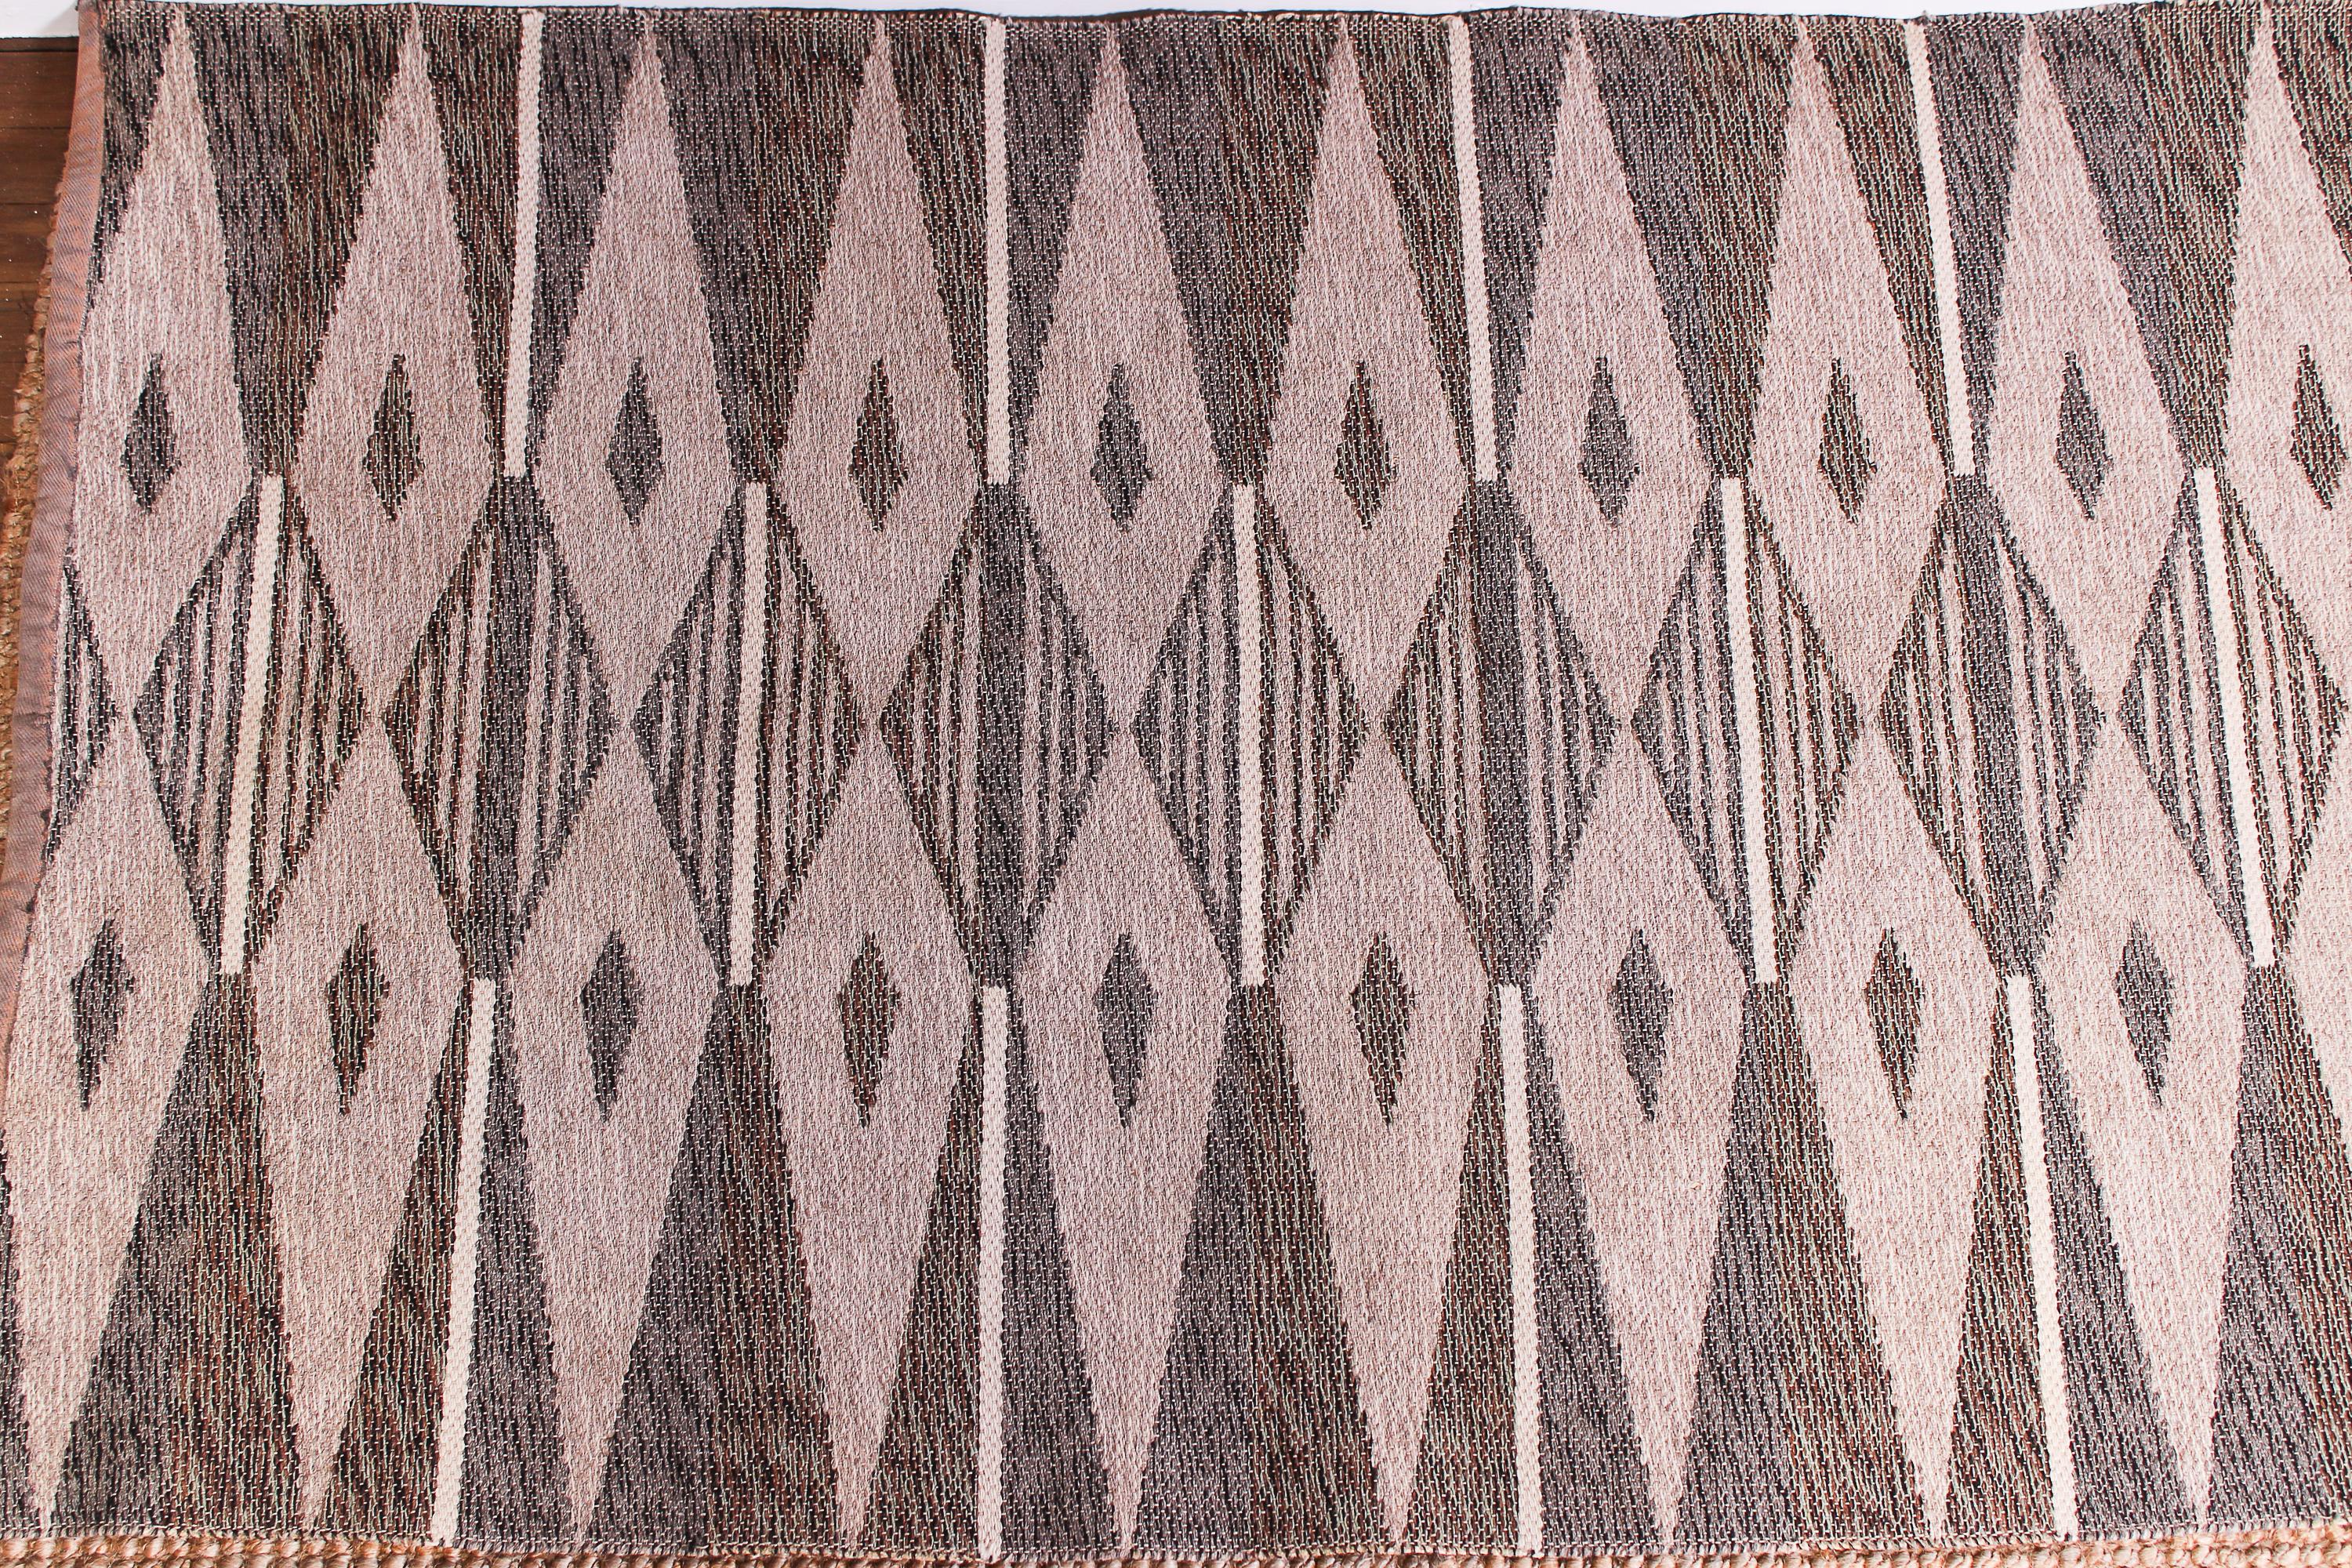 Midcentury Scandinavian Flat-Weave Gallery Carpet, 1950s In Good Condition For Sale In Malmo, SE